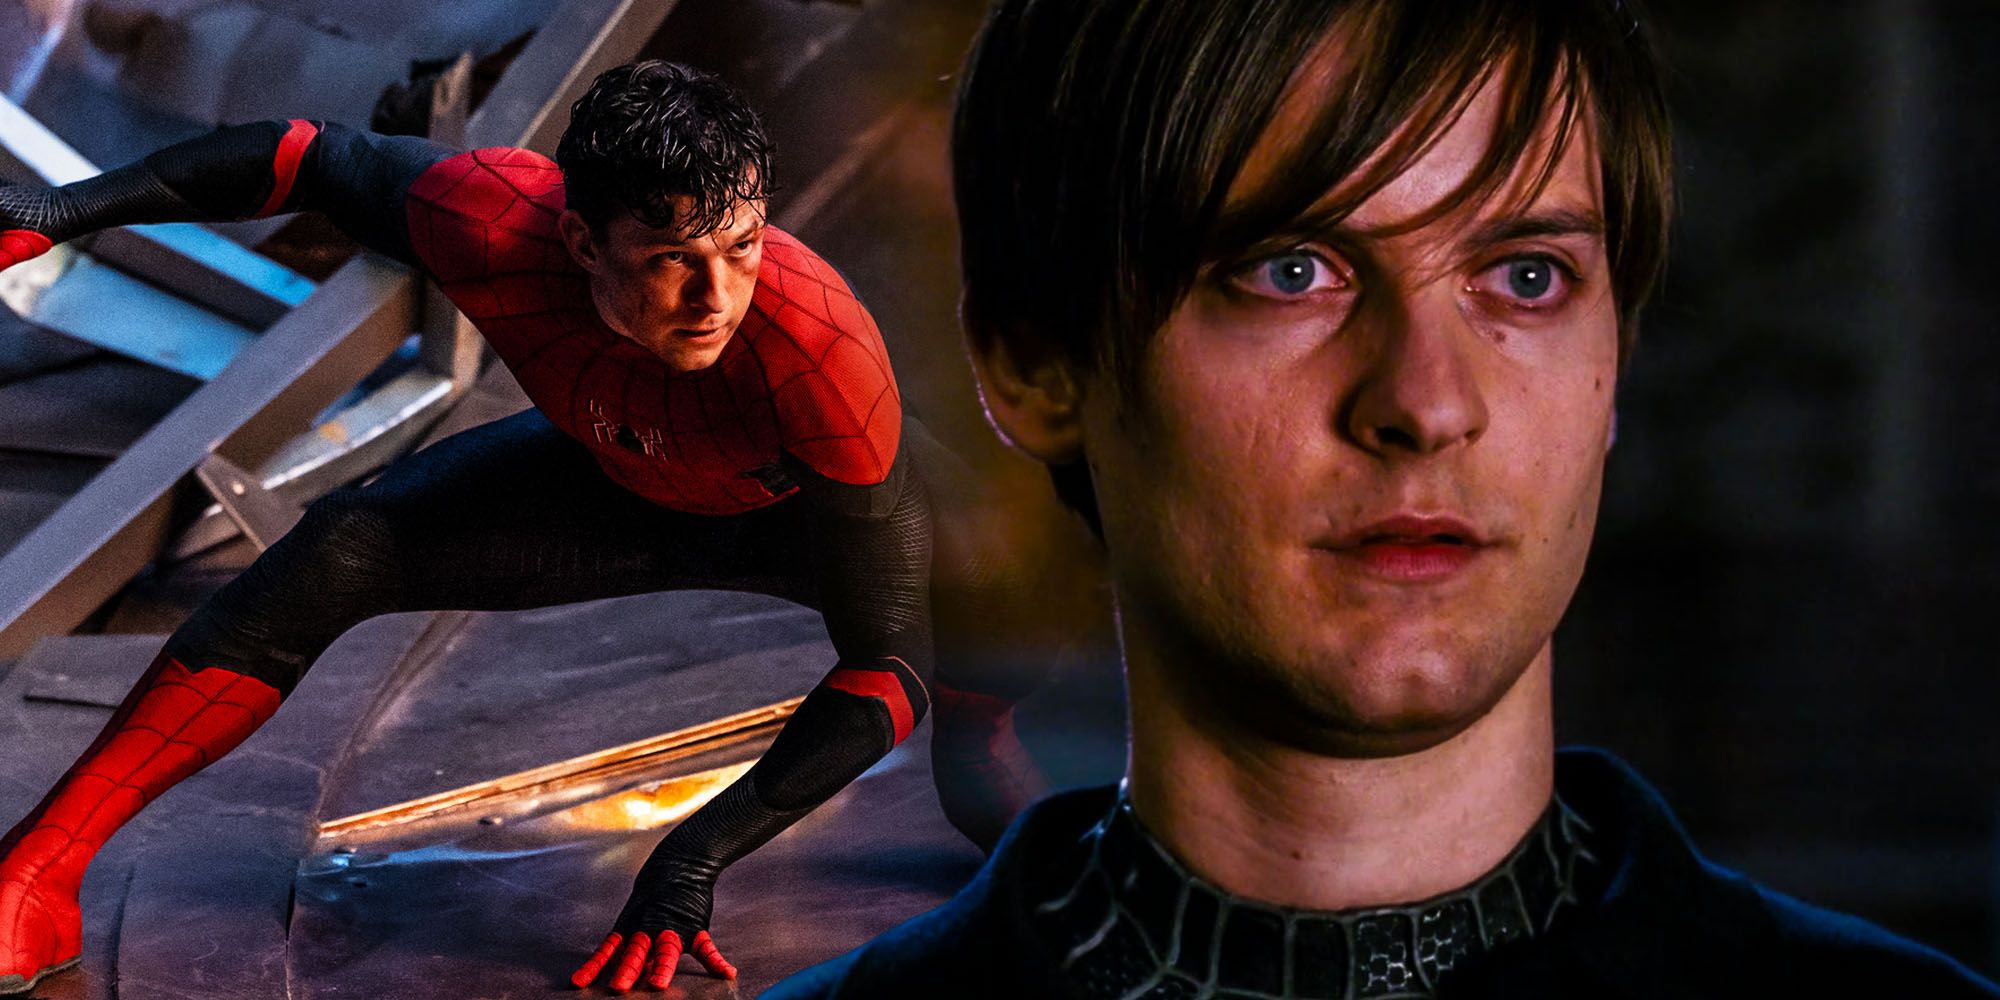 Tom Holland spiderman now way home setting up spiderman 3 hated emo peter parker